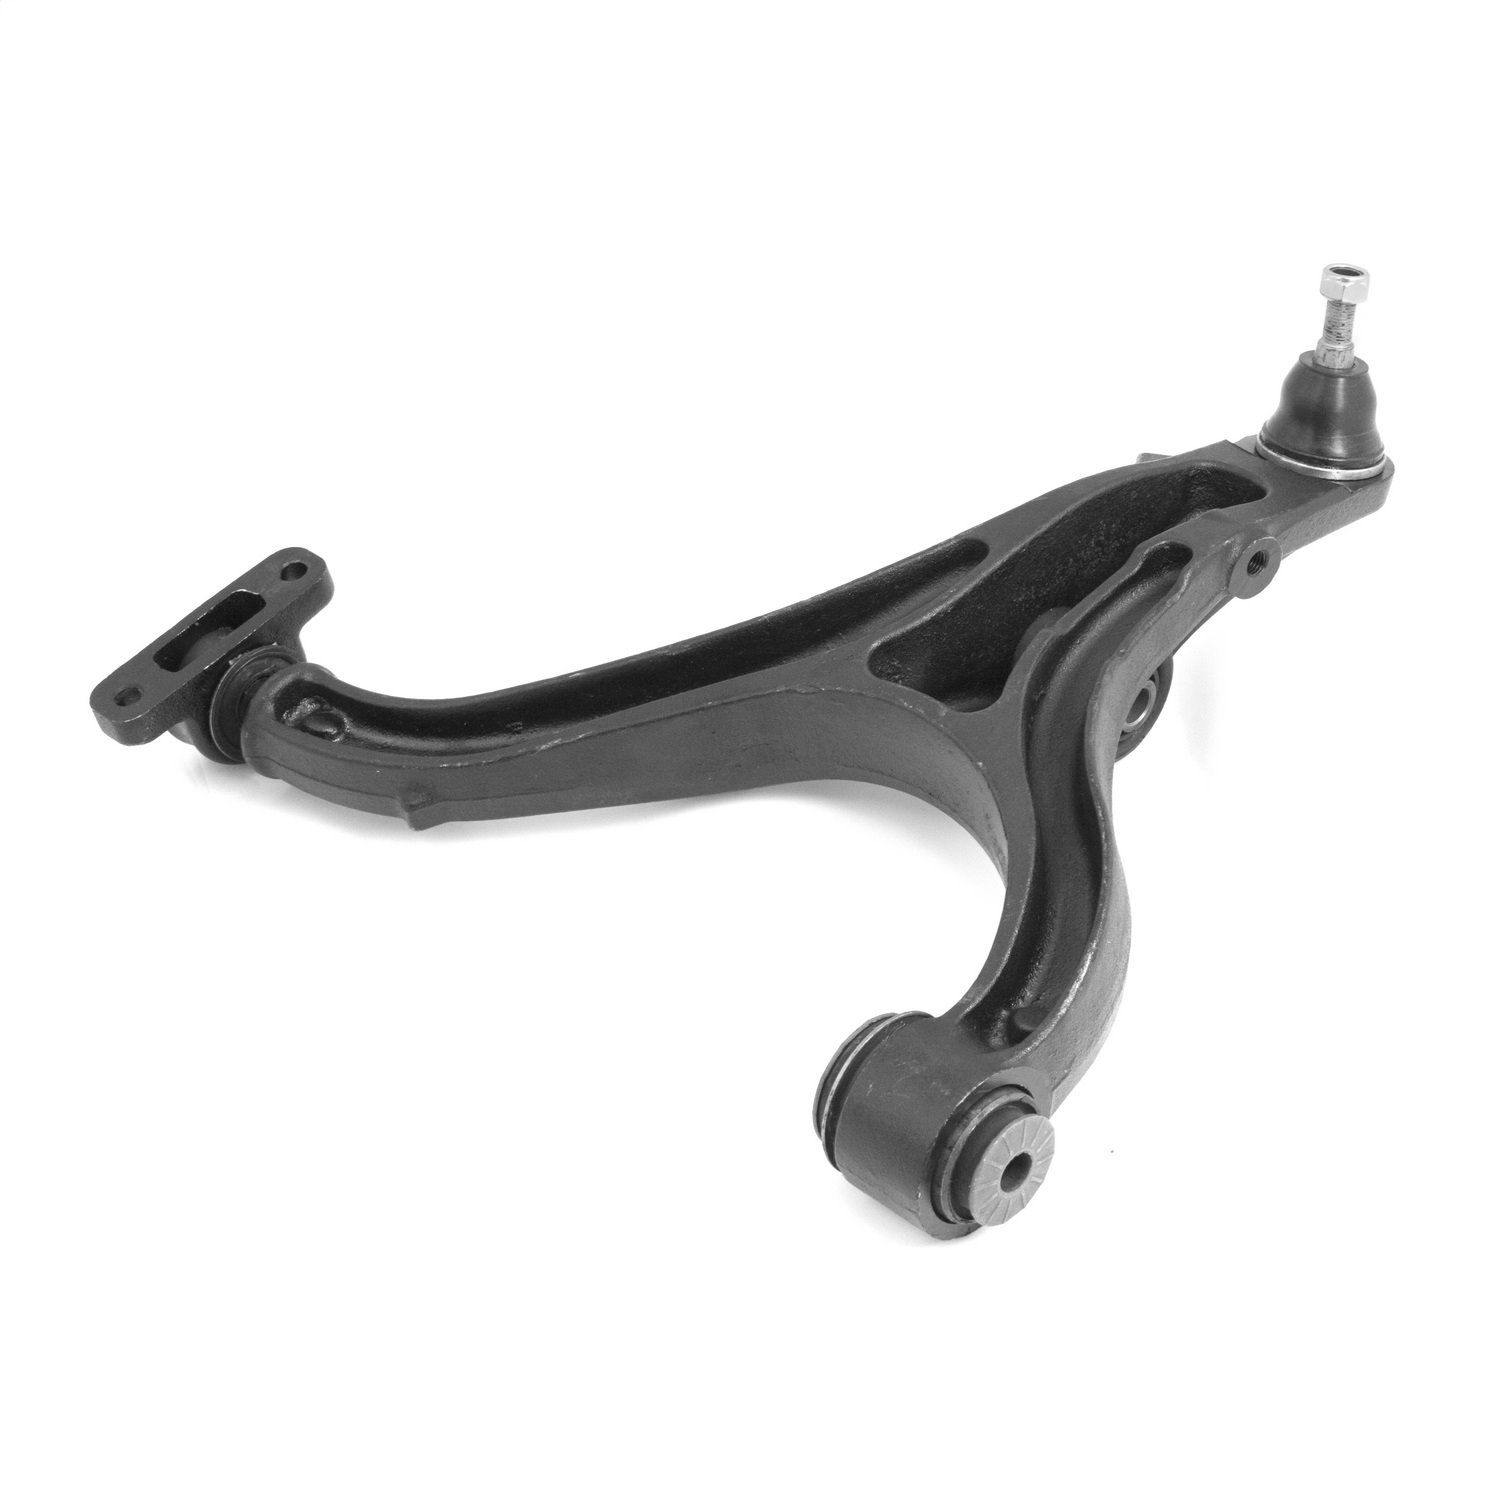 This front lower control arm from Omix-ADA fits the right side on 05-10 Jeep Grand Cherokees and 06-